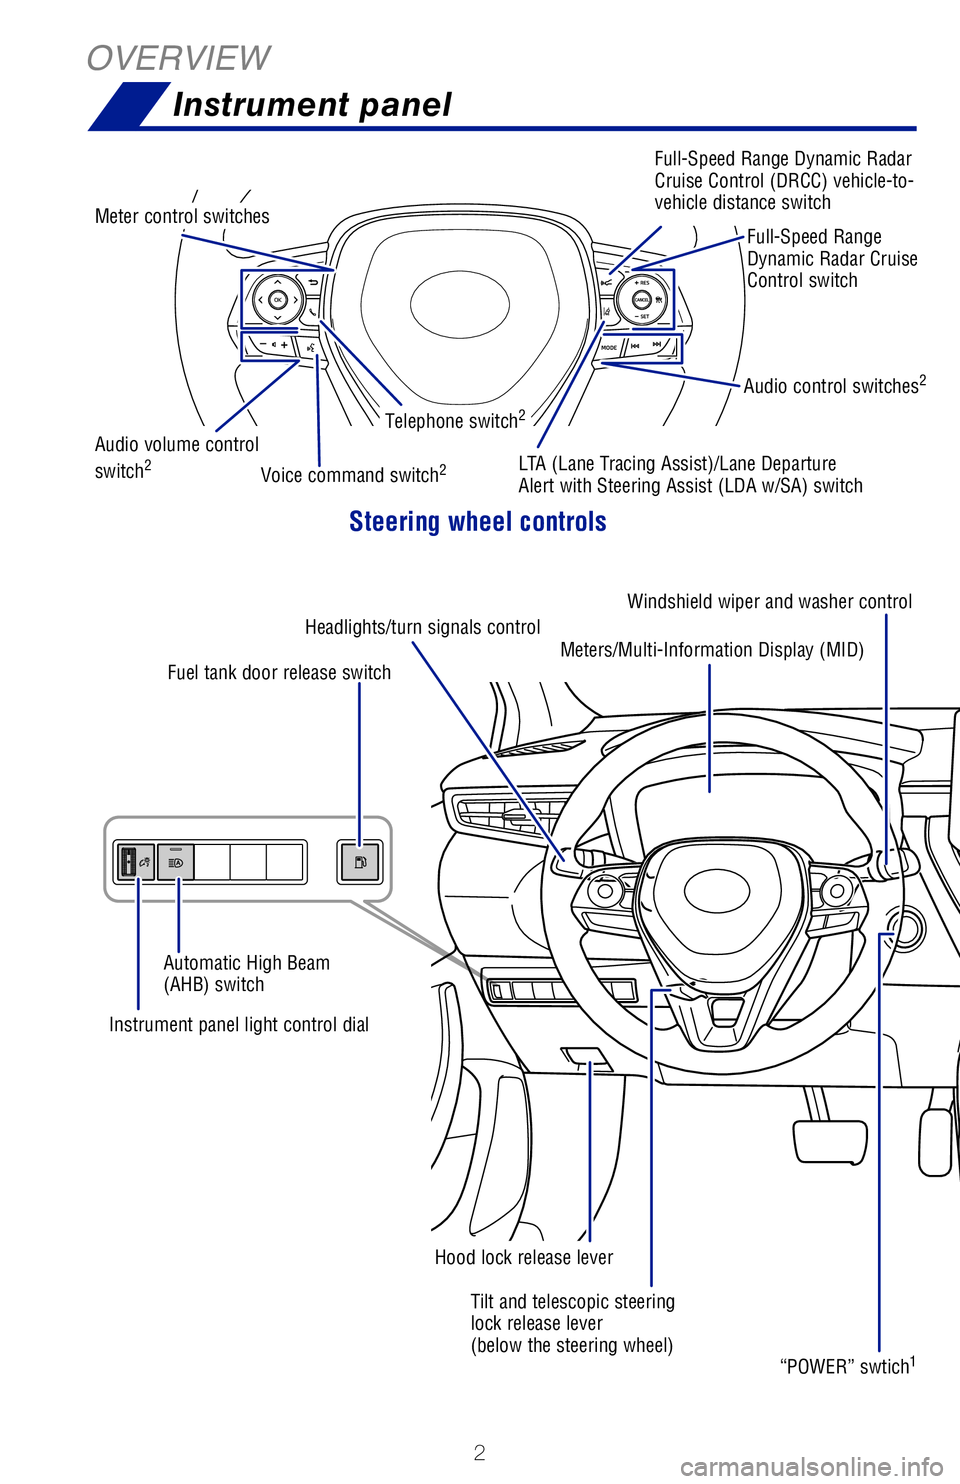 TOYOTA COROLLA HYBRID 2021  Owners Manual (in English) 2
OVERVIEWInstrument panel
Windshield wiper and washer control
Tilt and telescopic steering 
lock release lever 
(below the steering wheel)
Instrument panel light control dial “POWER” swtich
1
Hoo